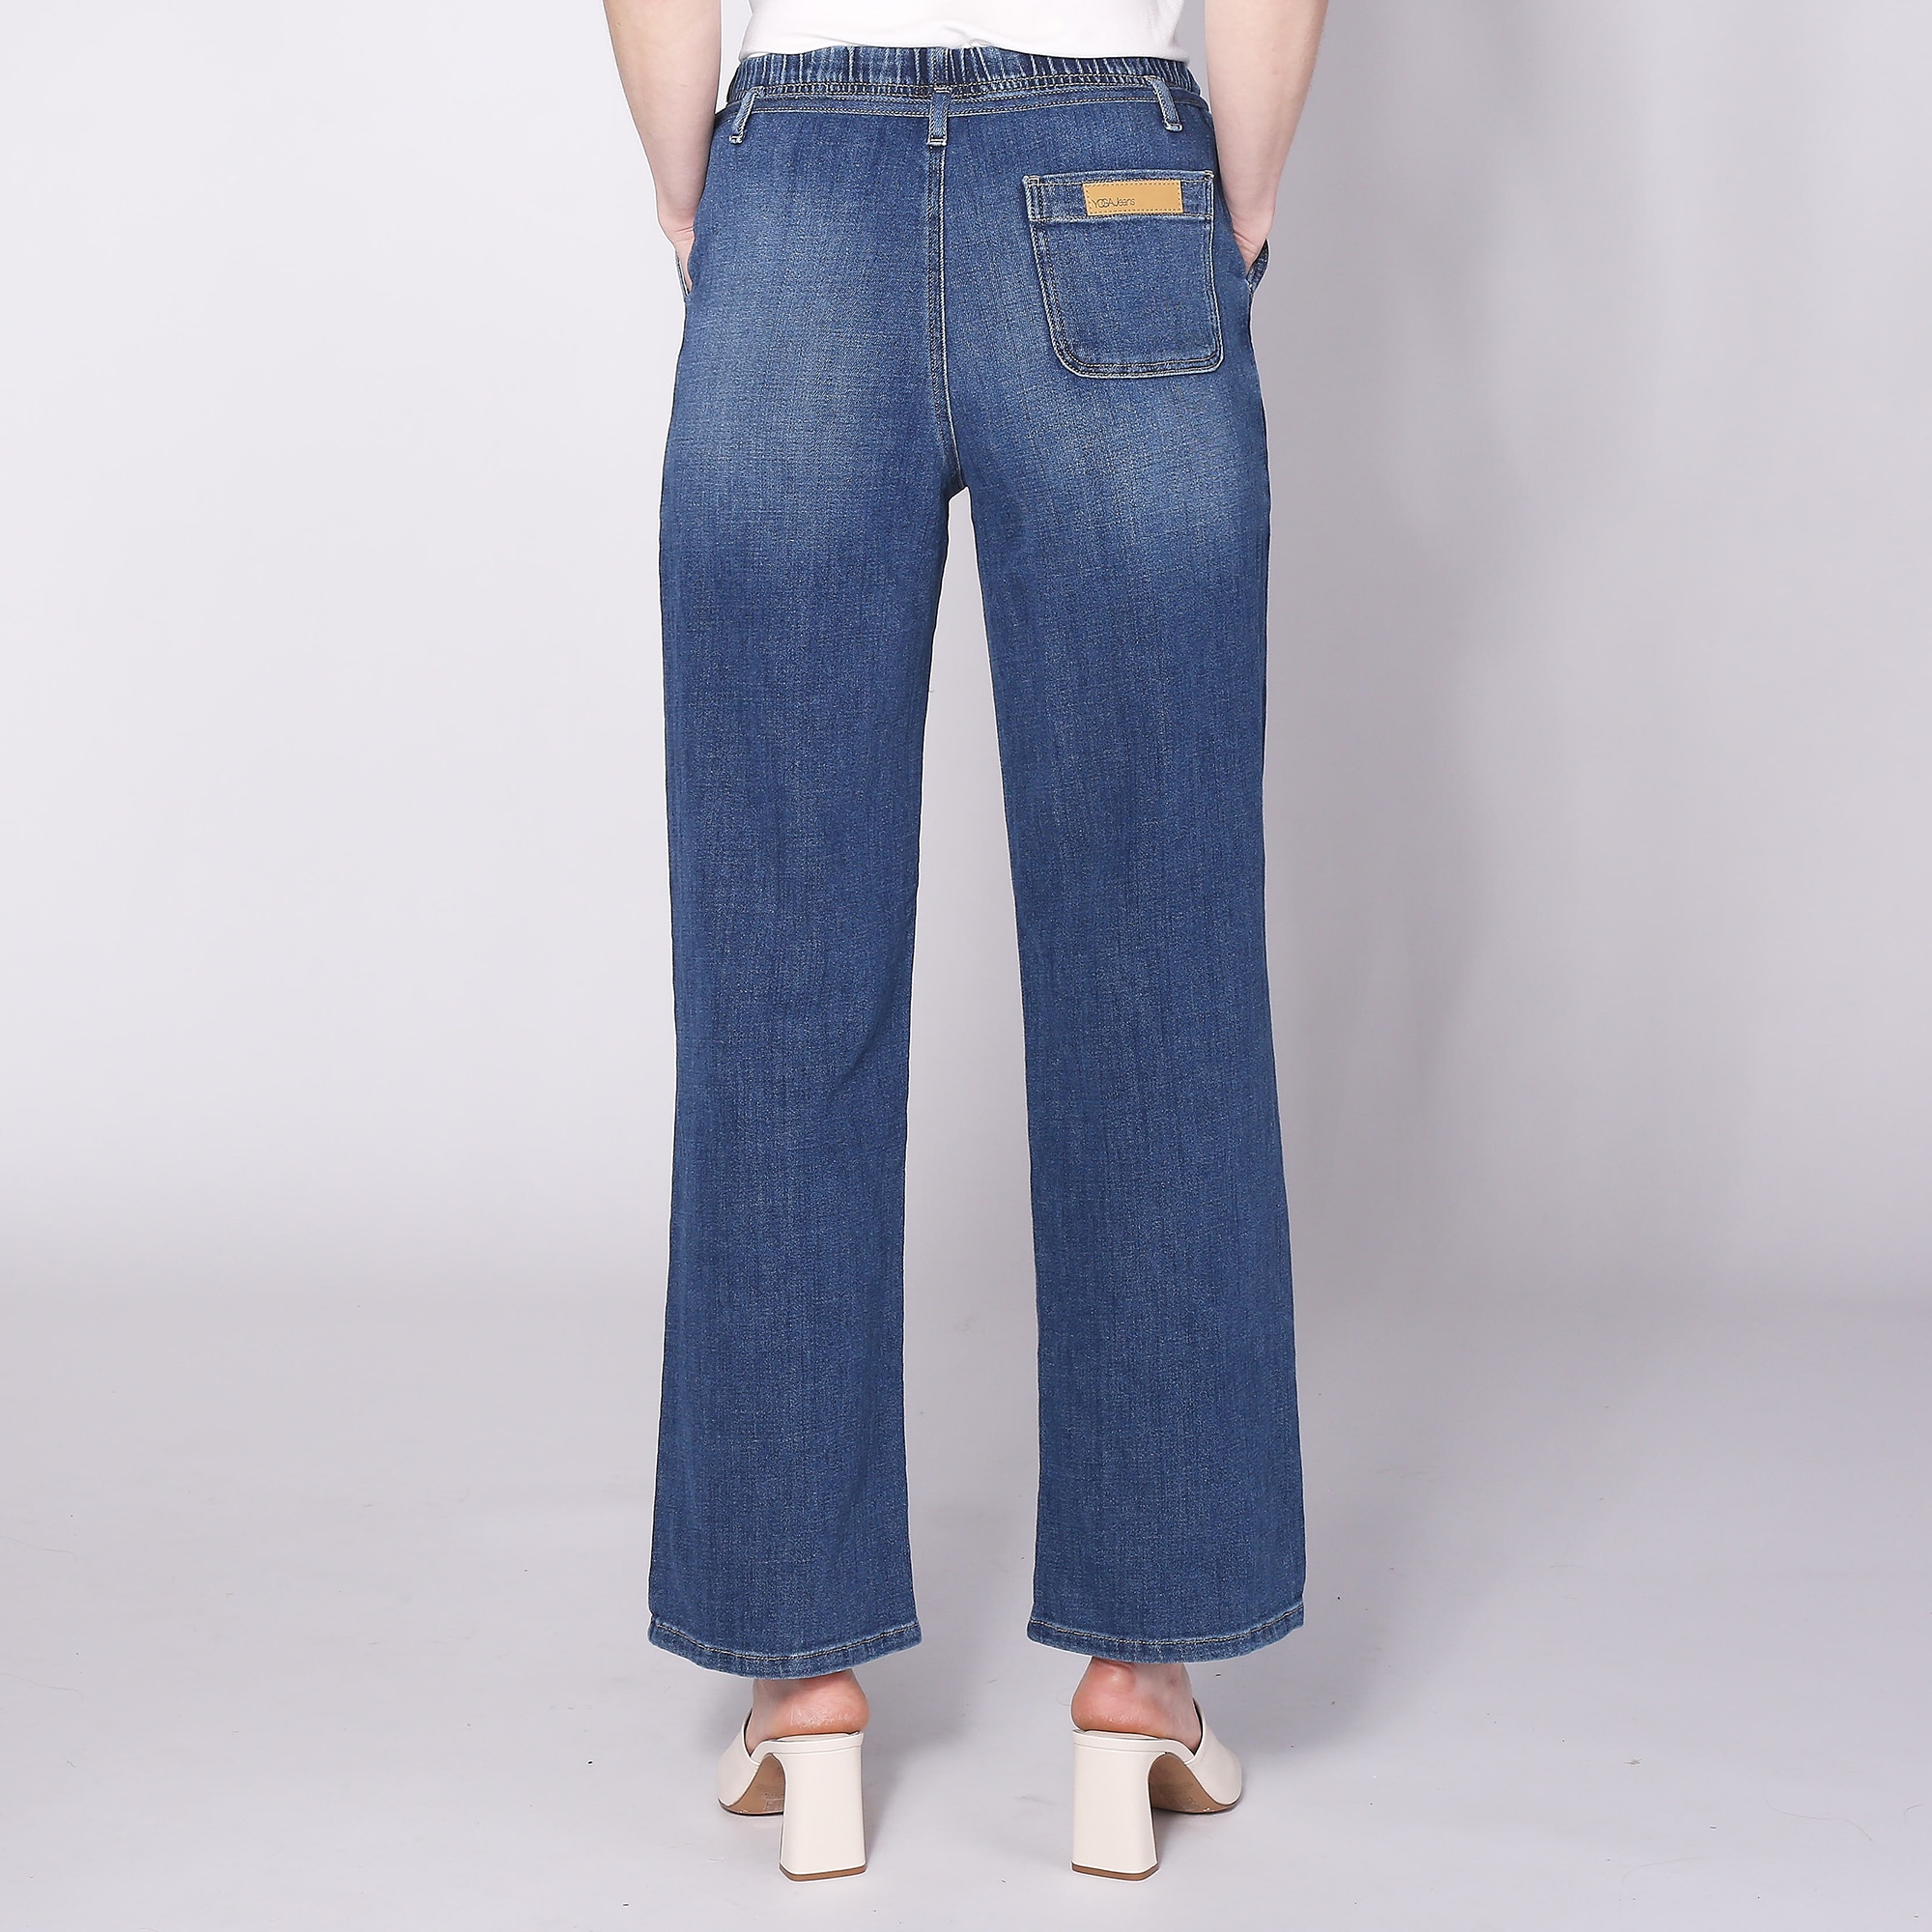 Clothing & Shoes - Bottoms - Jeans - Straight - Bellina Pull-On 